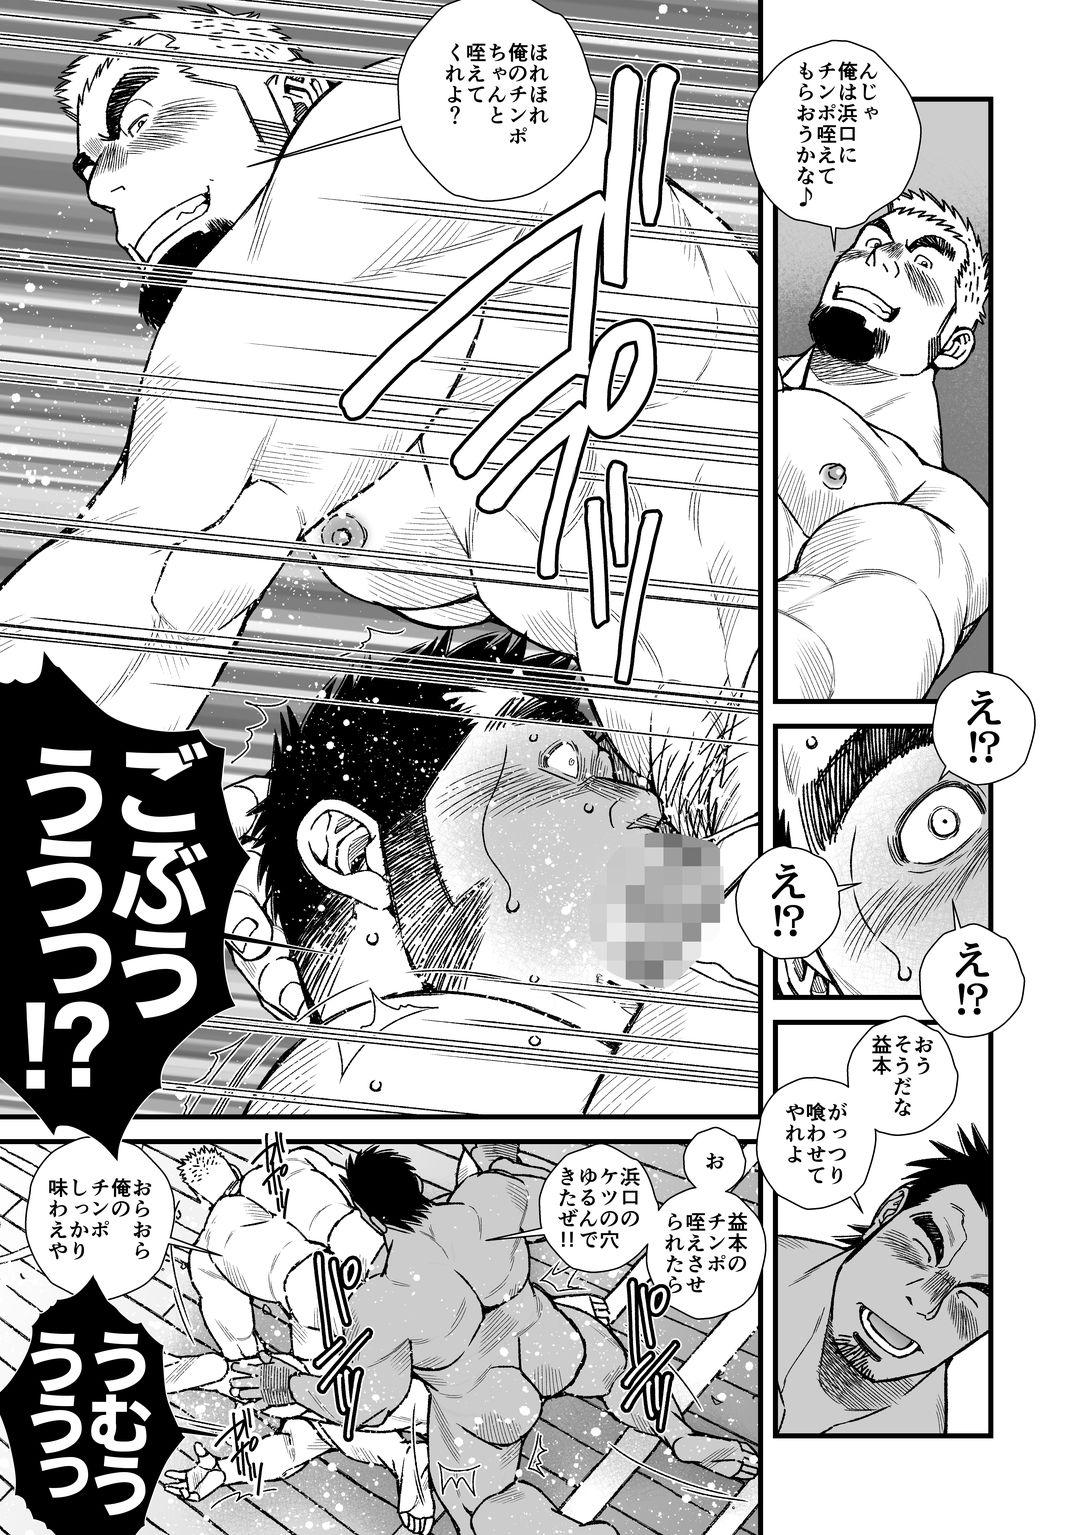 Ichikawa Geki-Han-Sha - The Hot-Blooded Captain of the Wrestling Club Loves a Clean Fight 13